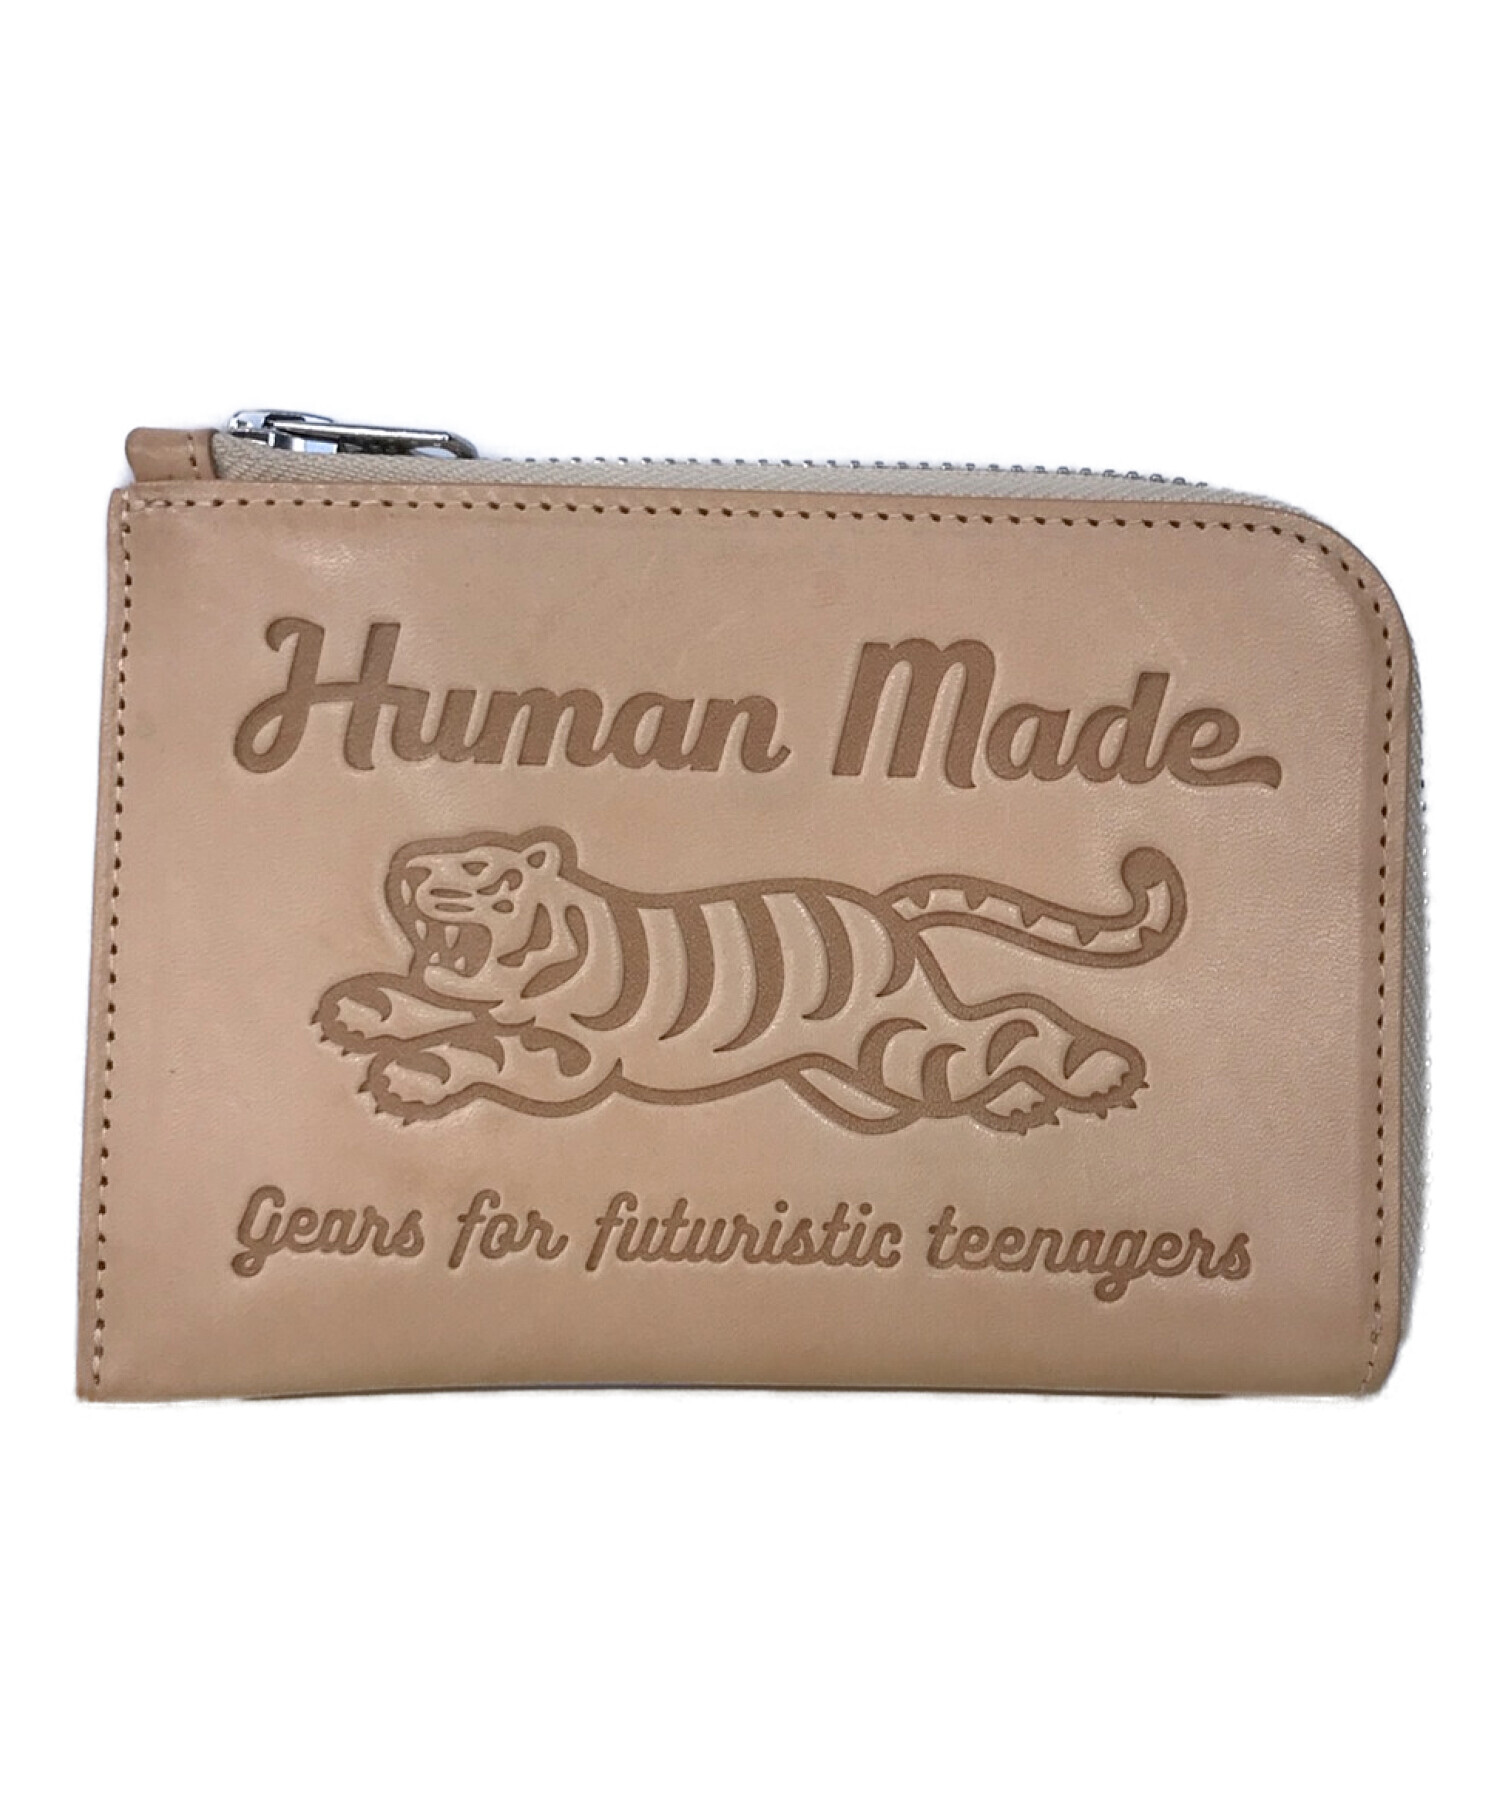 HUMAN MADE Leather Wallet 　 財布　コインケース今季awカラーで即完の商品です